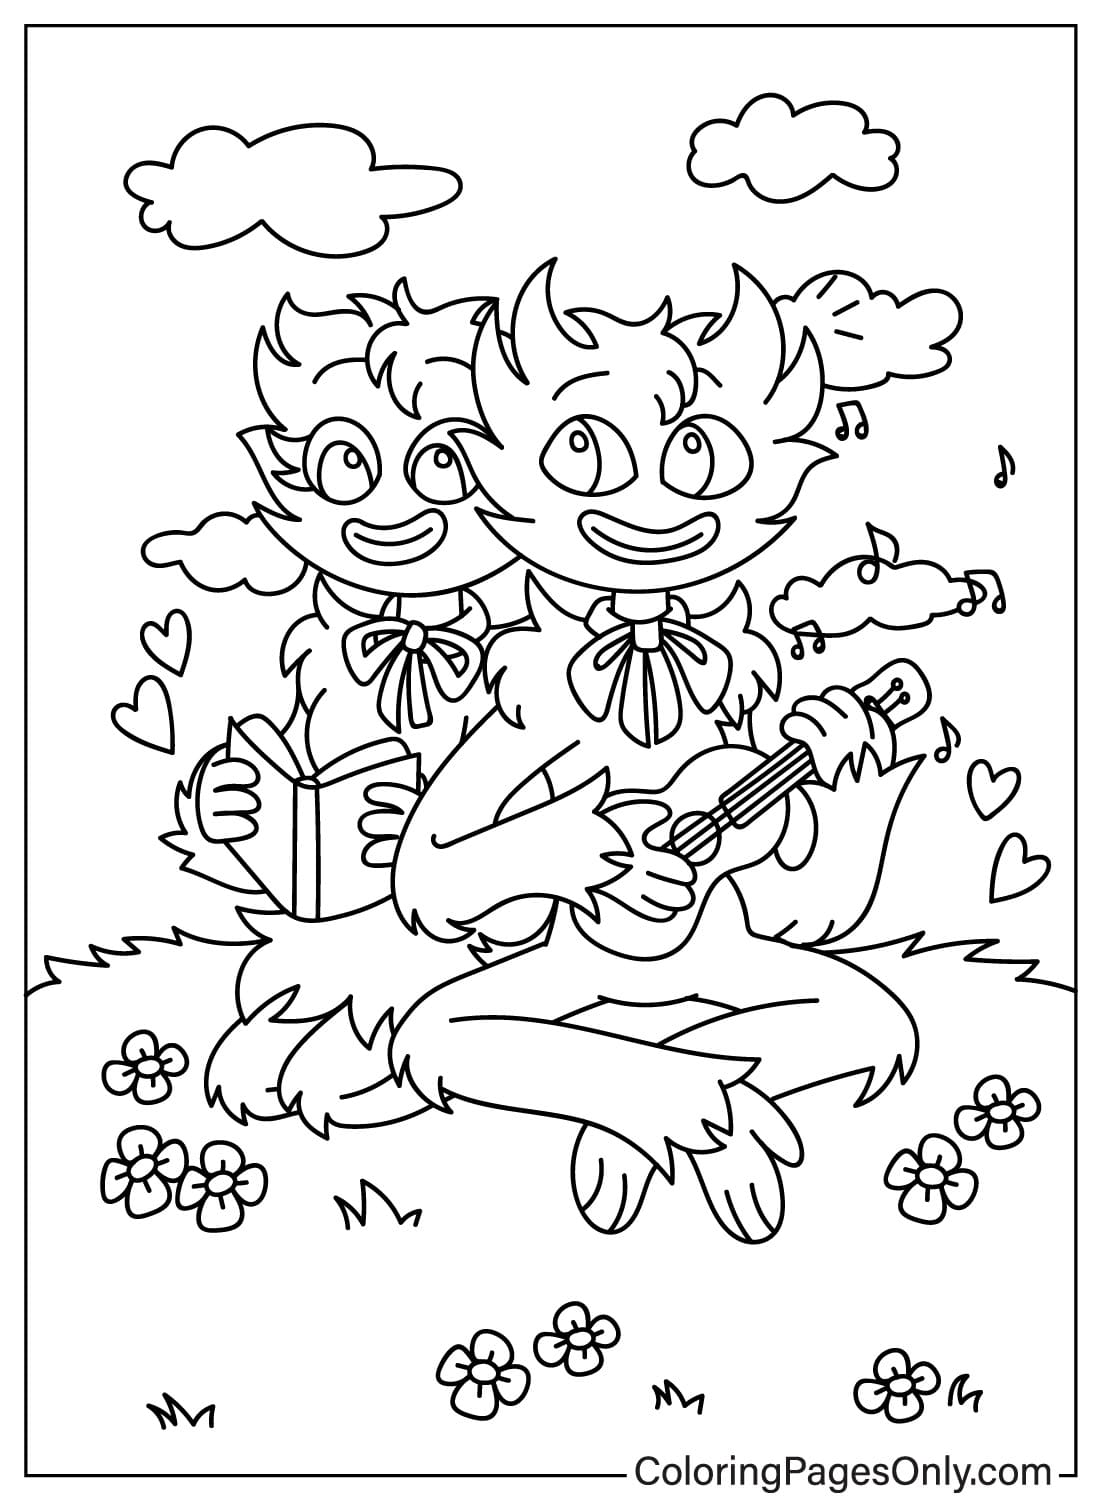 Coloriage Huggy Wuggy, Kissy Missy gratuit de Huggy Wuggy